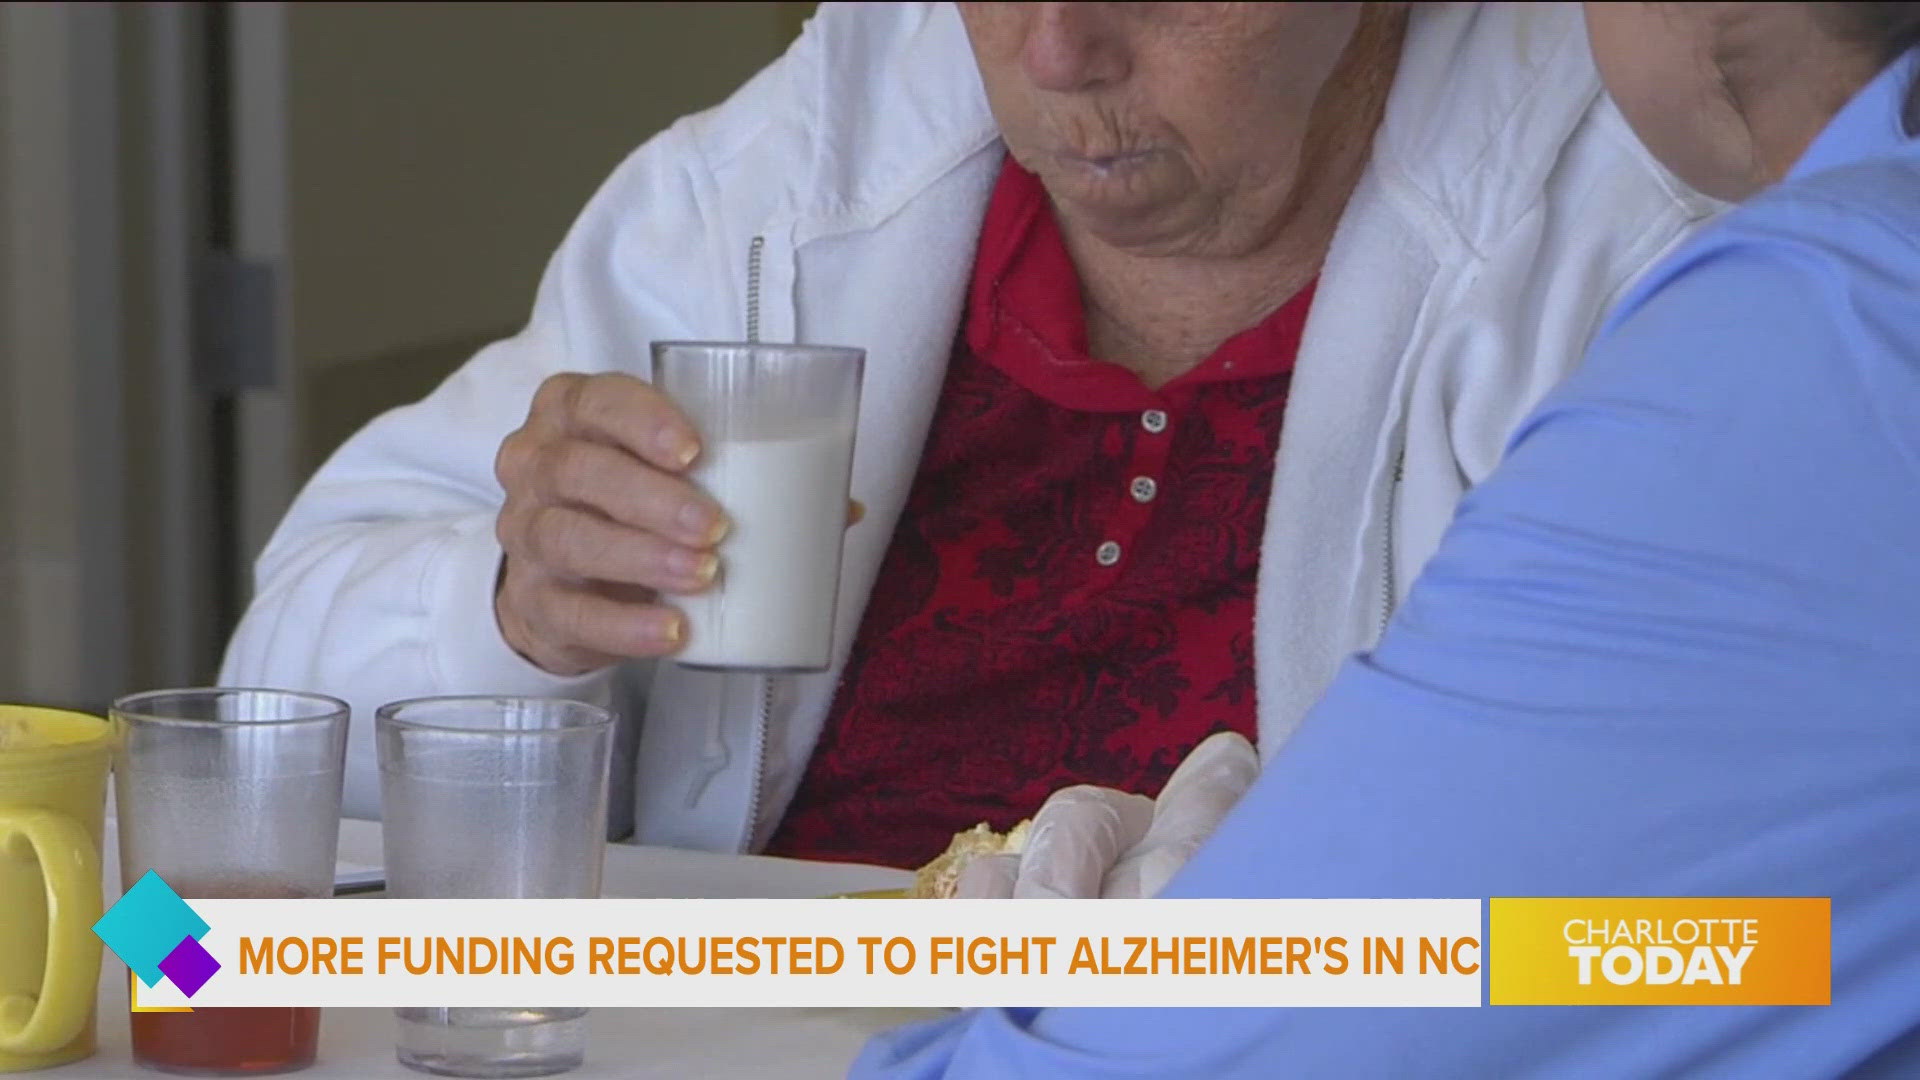 New numbers show more than 20K people in North Carolina have Alzheimer's